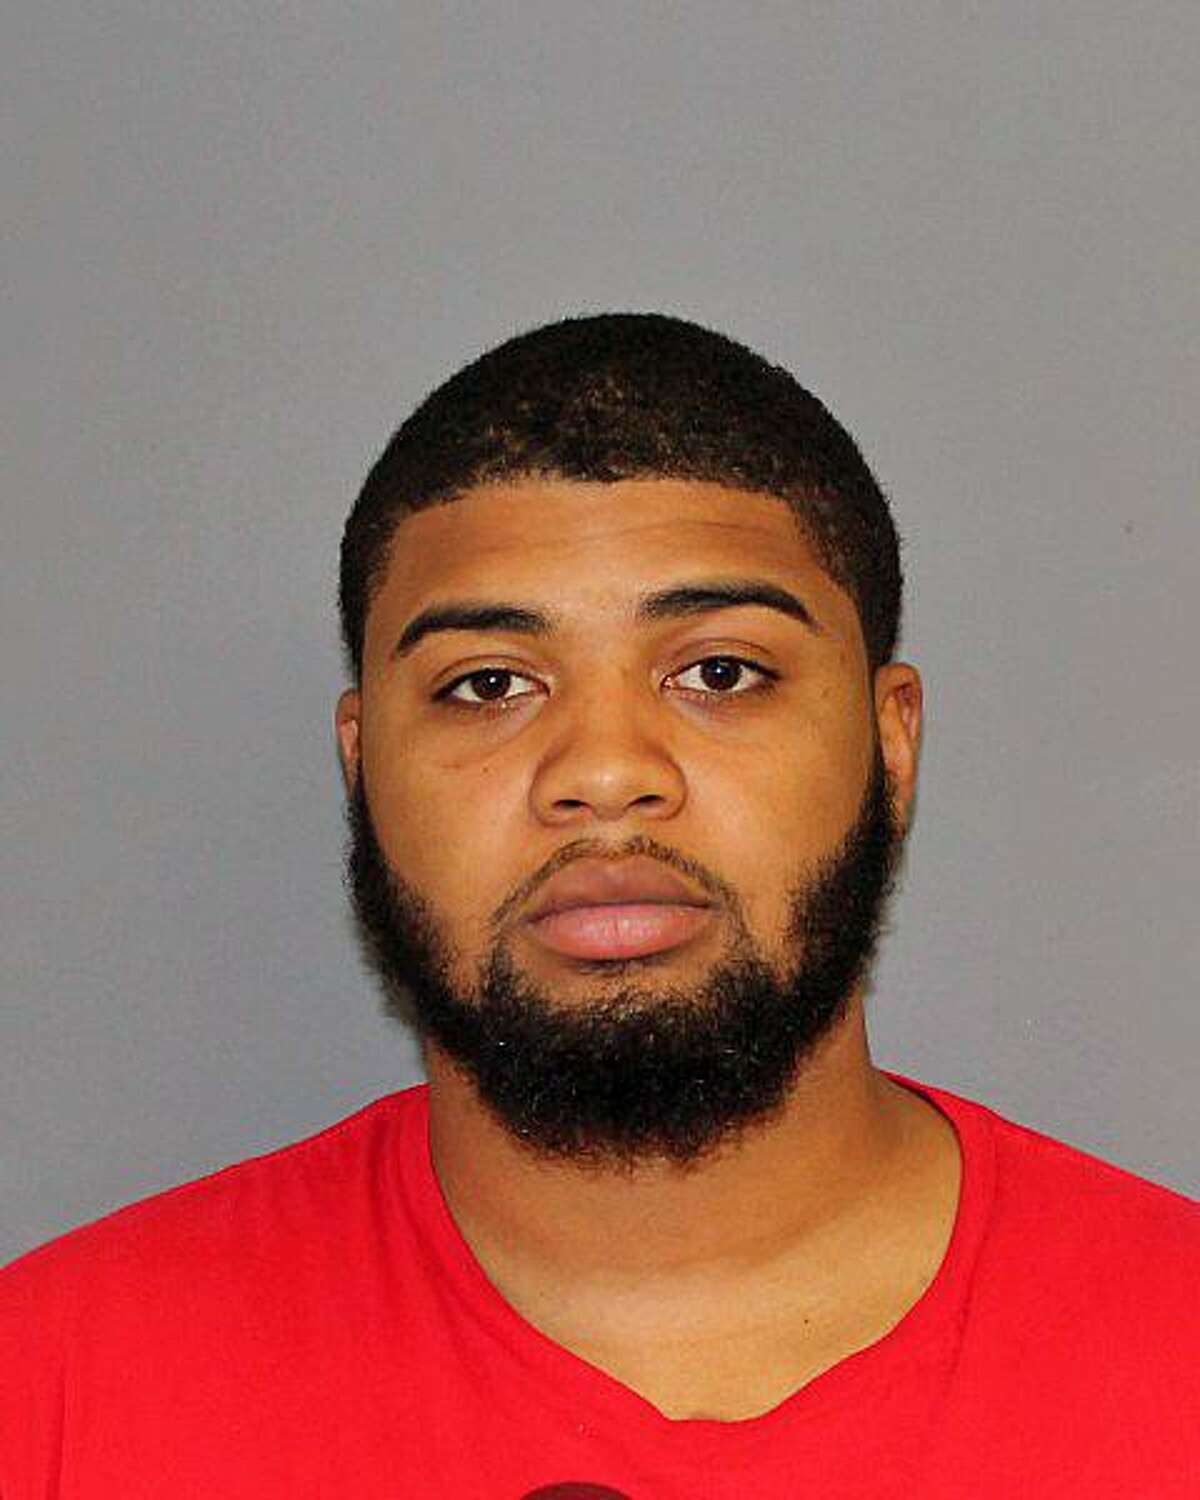 Davie Mcmillian, 23, of Waterbury, Conn., was charged Monday, Sept. 25, 2017, with illegal possession of narcotics and violation of a protective order, police said.